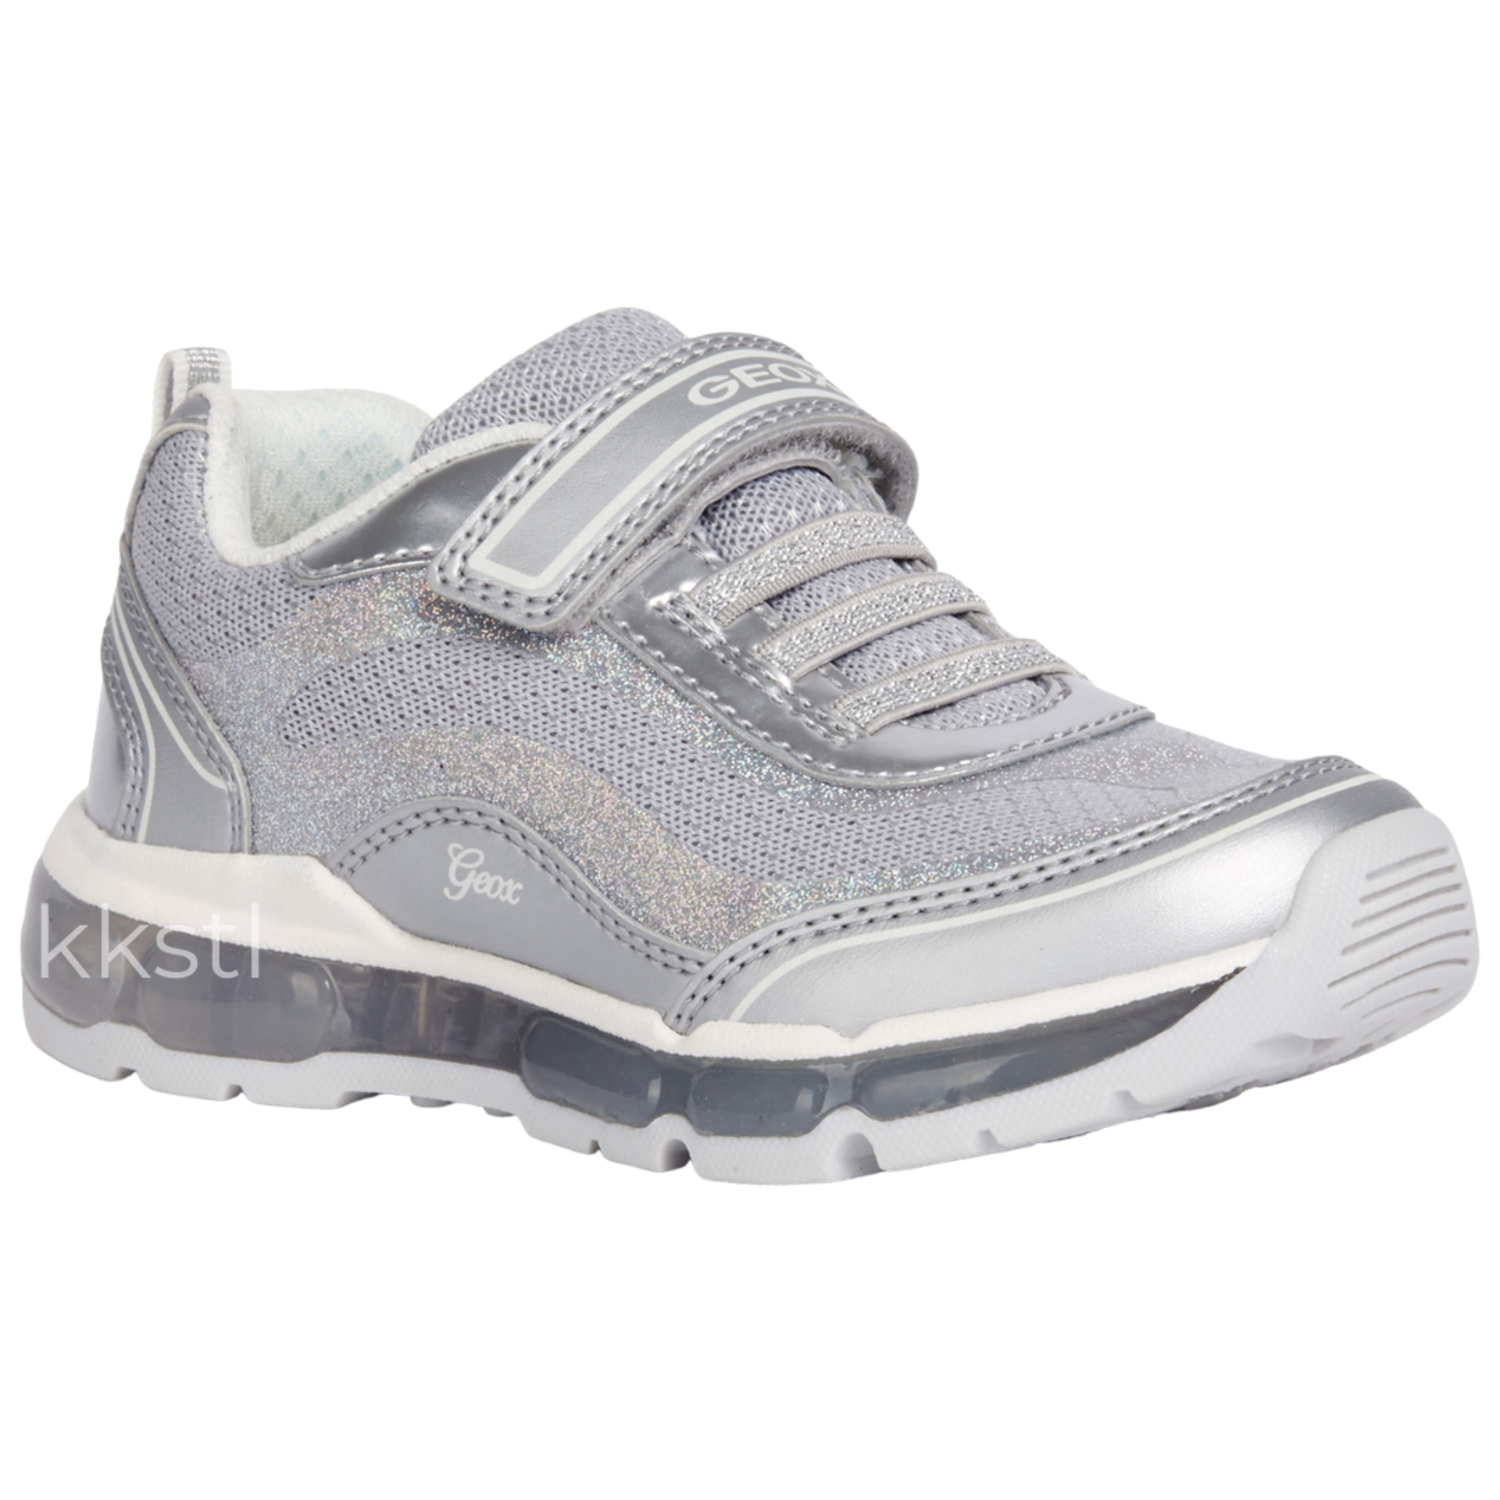 Geox Android Girl Silver - Kids Shoes in Canada - Kiddie Kobbler St Laurent